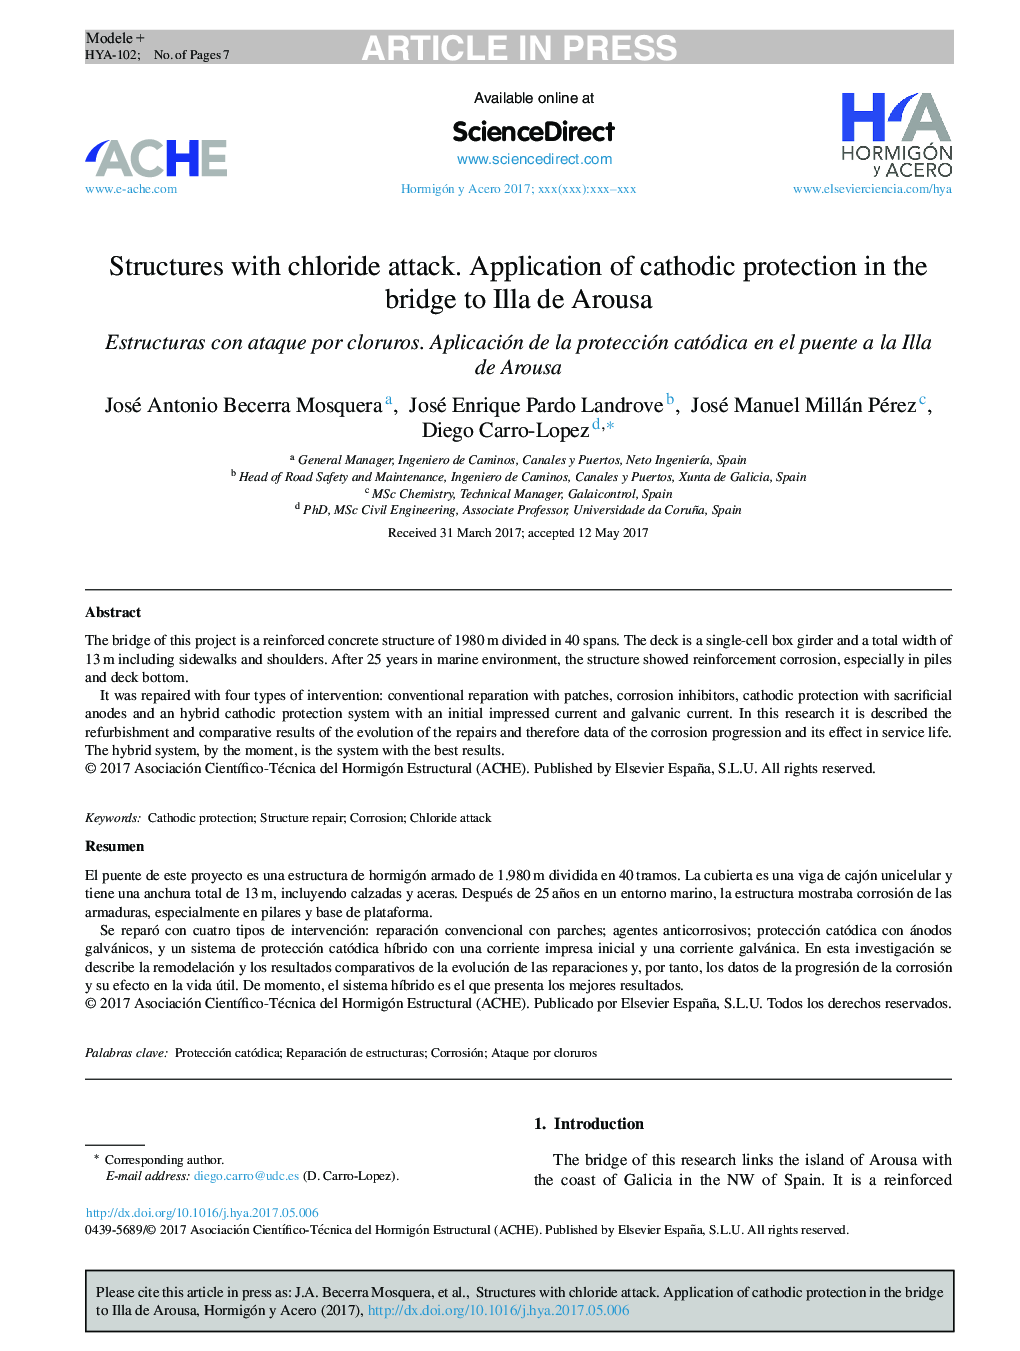 Structures with chloride attack. Application of cathodic protection in the bridge to Illa de Arousa